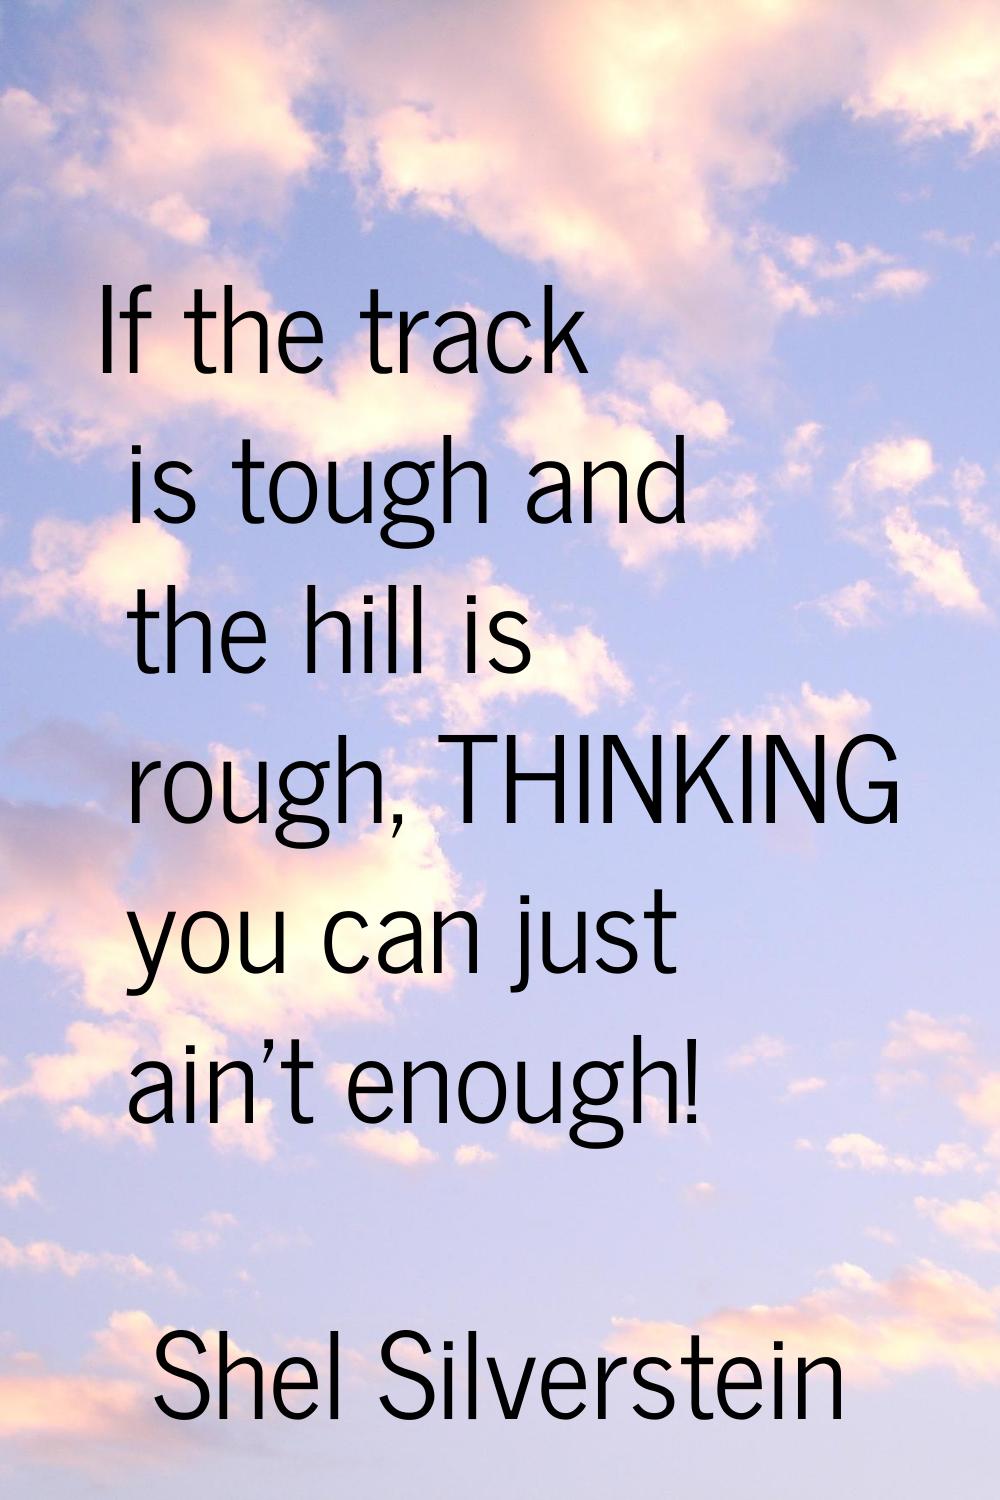 If the track is tough and the hill is rough, THINKING you can just ain't enough!